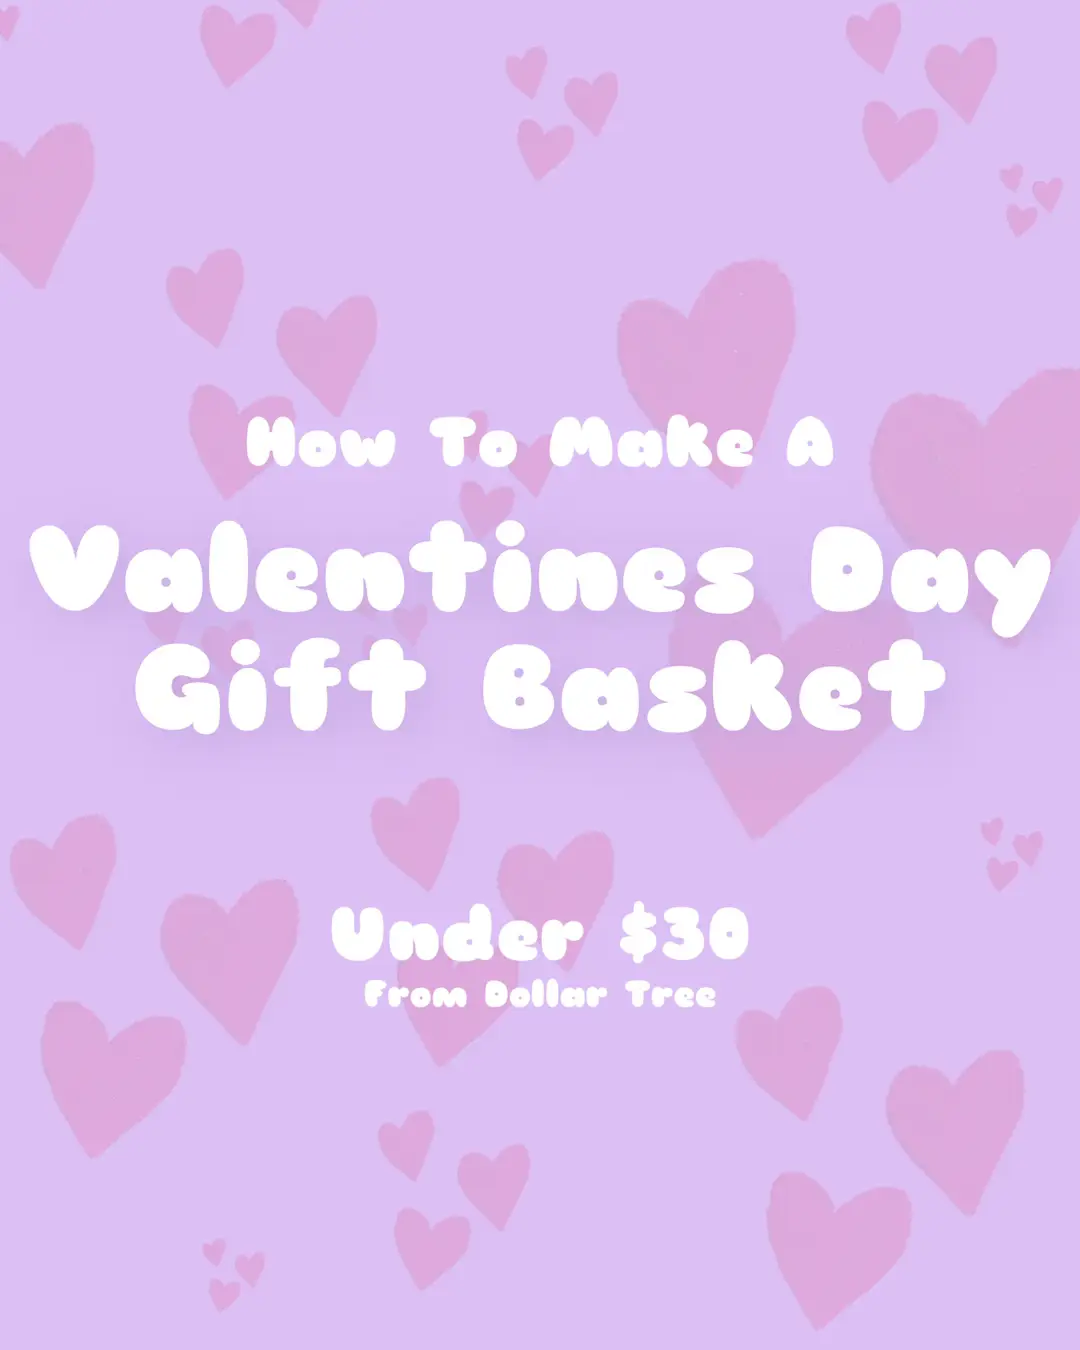 Making these for more stores, any suggestions? #ValentinesDay #valentines #valentine #boyfriendgiftideas #giftideasforboyfriend #giftideasforhim #valentinesdaygiftideas #valentinesdaygiftsforhim #romance #romantic #valentinesdaygiftguide #giftideas #valentinesgiftideas #valentinesgiftforhim #valentinesgiftsforhim #valentinesdaygift #valentinesdaygifts #valentinesdayathome #giftguide #diygifts #diygiftsforhim #budgetgifts #giftsonabudget #girlfriendgoals #gift #giftsforboyfriend #giftsforhim #boyfriendgifts #Love #couple #couplegoals #boyfriendgoals #romancecore #romanticcore #valentinesdayinspo #coquette #vday #galentinesday #giftideasforgirlfriend #giftideasforher  #valentinesdaygiftsforher #valentinesgiftforher #valentinesgiftsforher #boyfriendgoals #diygiftsforher #giftsforgirlfriend #giftsforher #girlfriendgifts #fyp